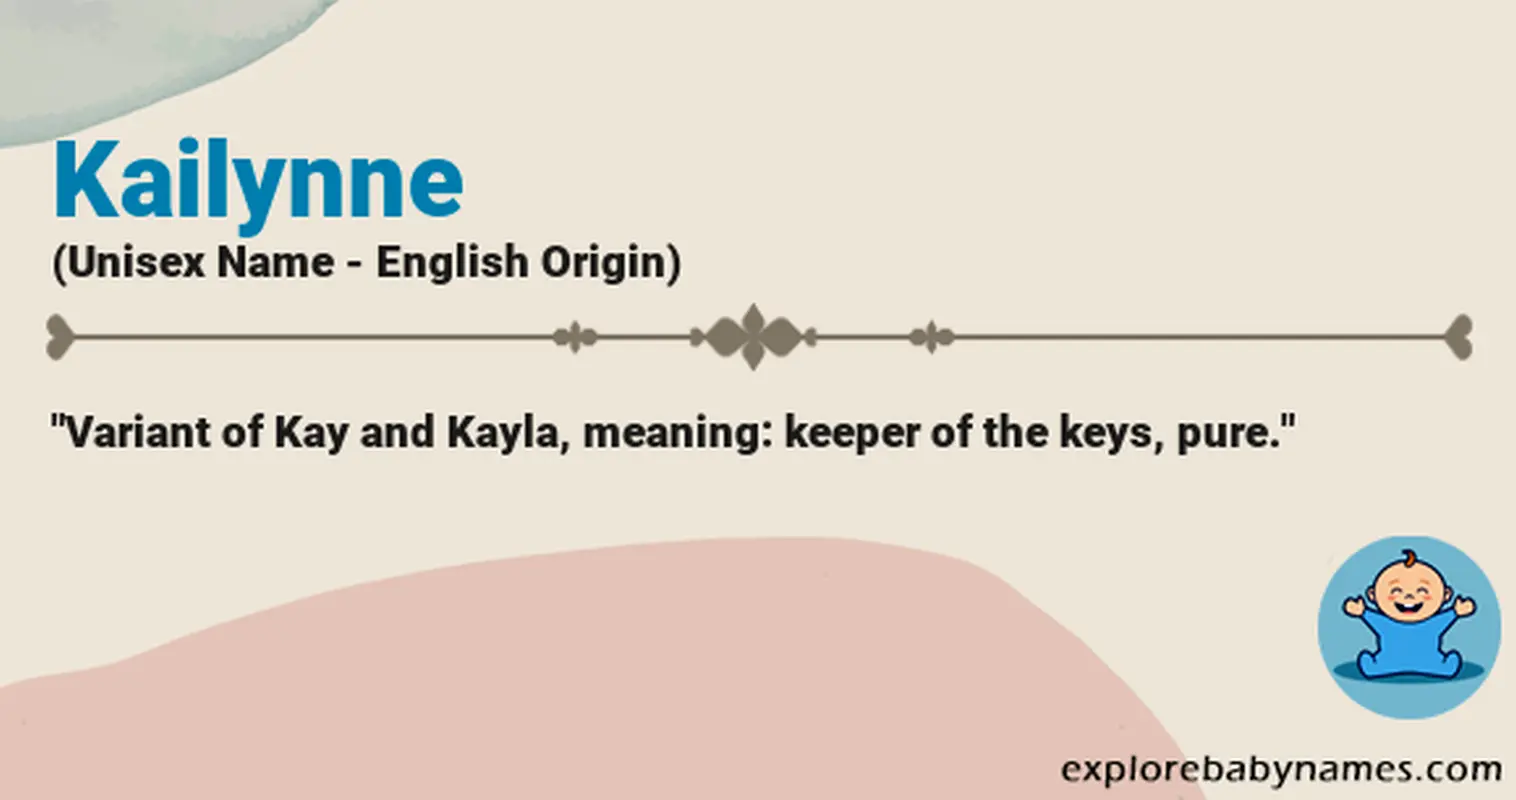 Meaning of Kailynne